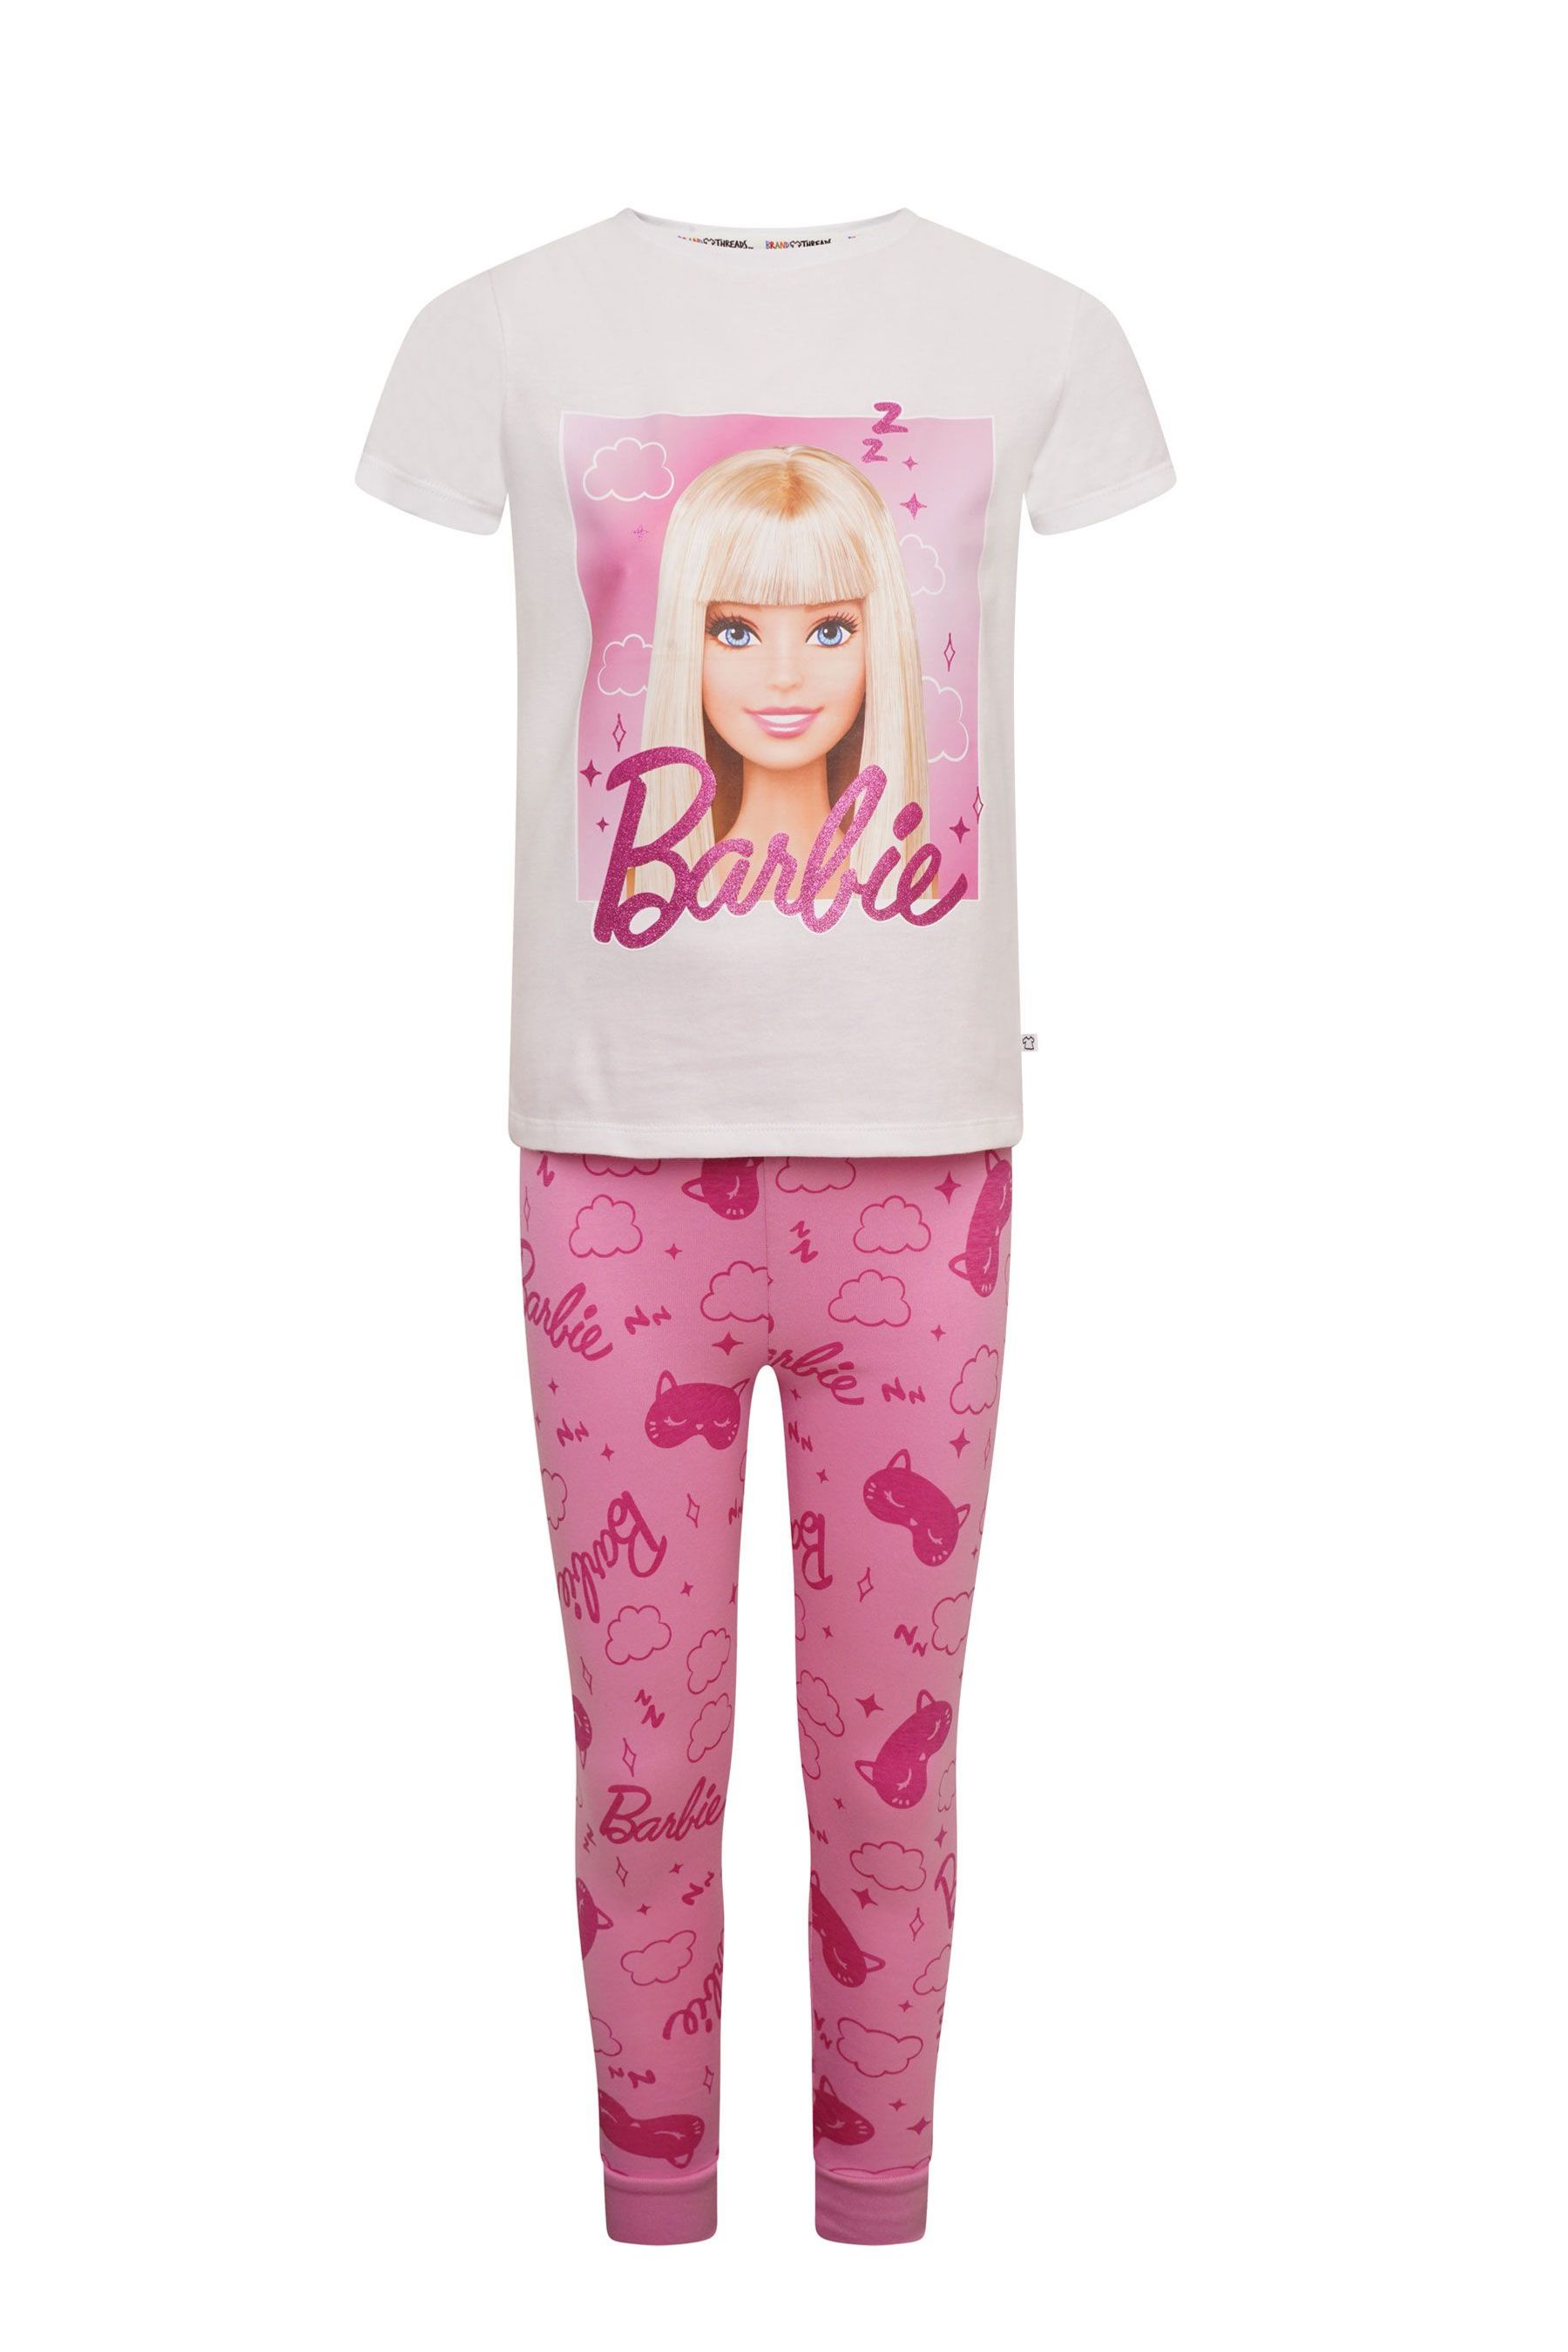 Buy Brand Threads Barbie Girls BCI Cotton Pyjamas Ages 4-8 from Next ...